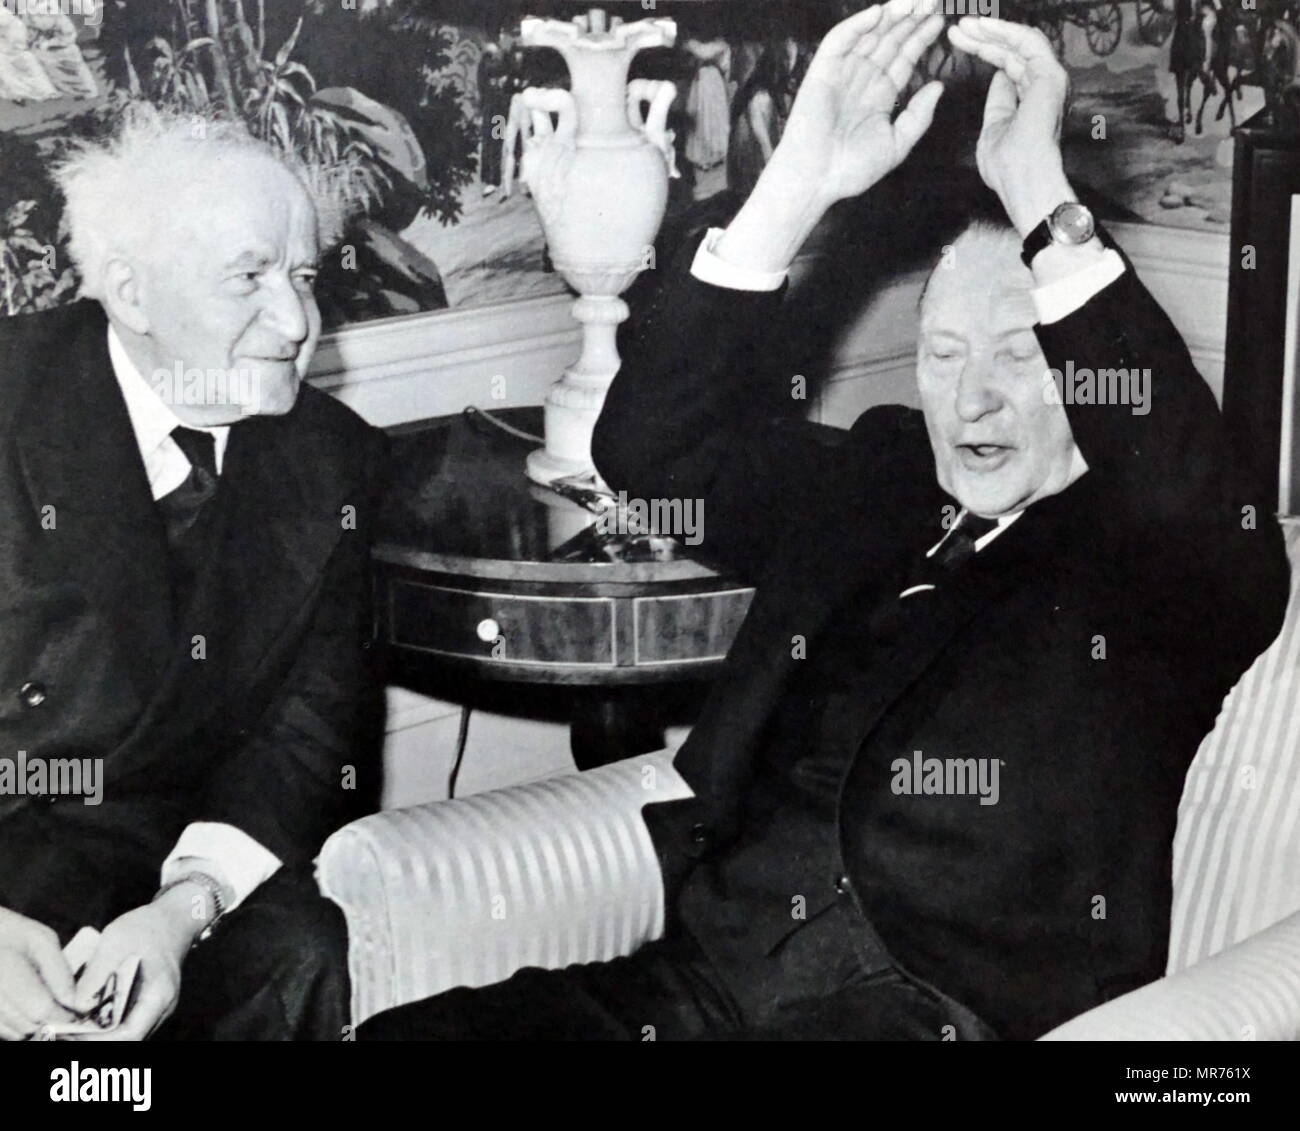 Ben Gurion meets adenauer in New York in 1961. Konrad Hermann Joseph Adenauer was a German statesman who served as the first Chancellor of the Federal Republic of Germany (West Germany) from 1949 to 1963. David Ben-Gurion (1886 –  1973), Israeli Labour Politician and first Prime Minister of Israel, 1948-1953 and 1955-1963. Stock Photo